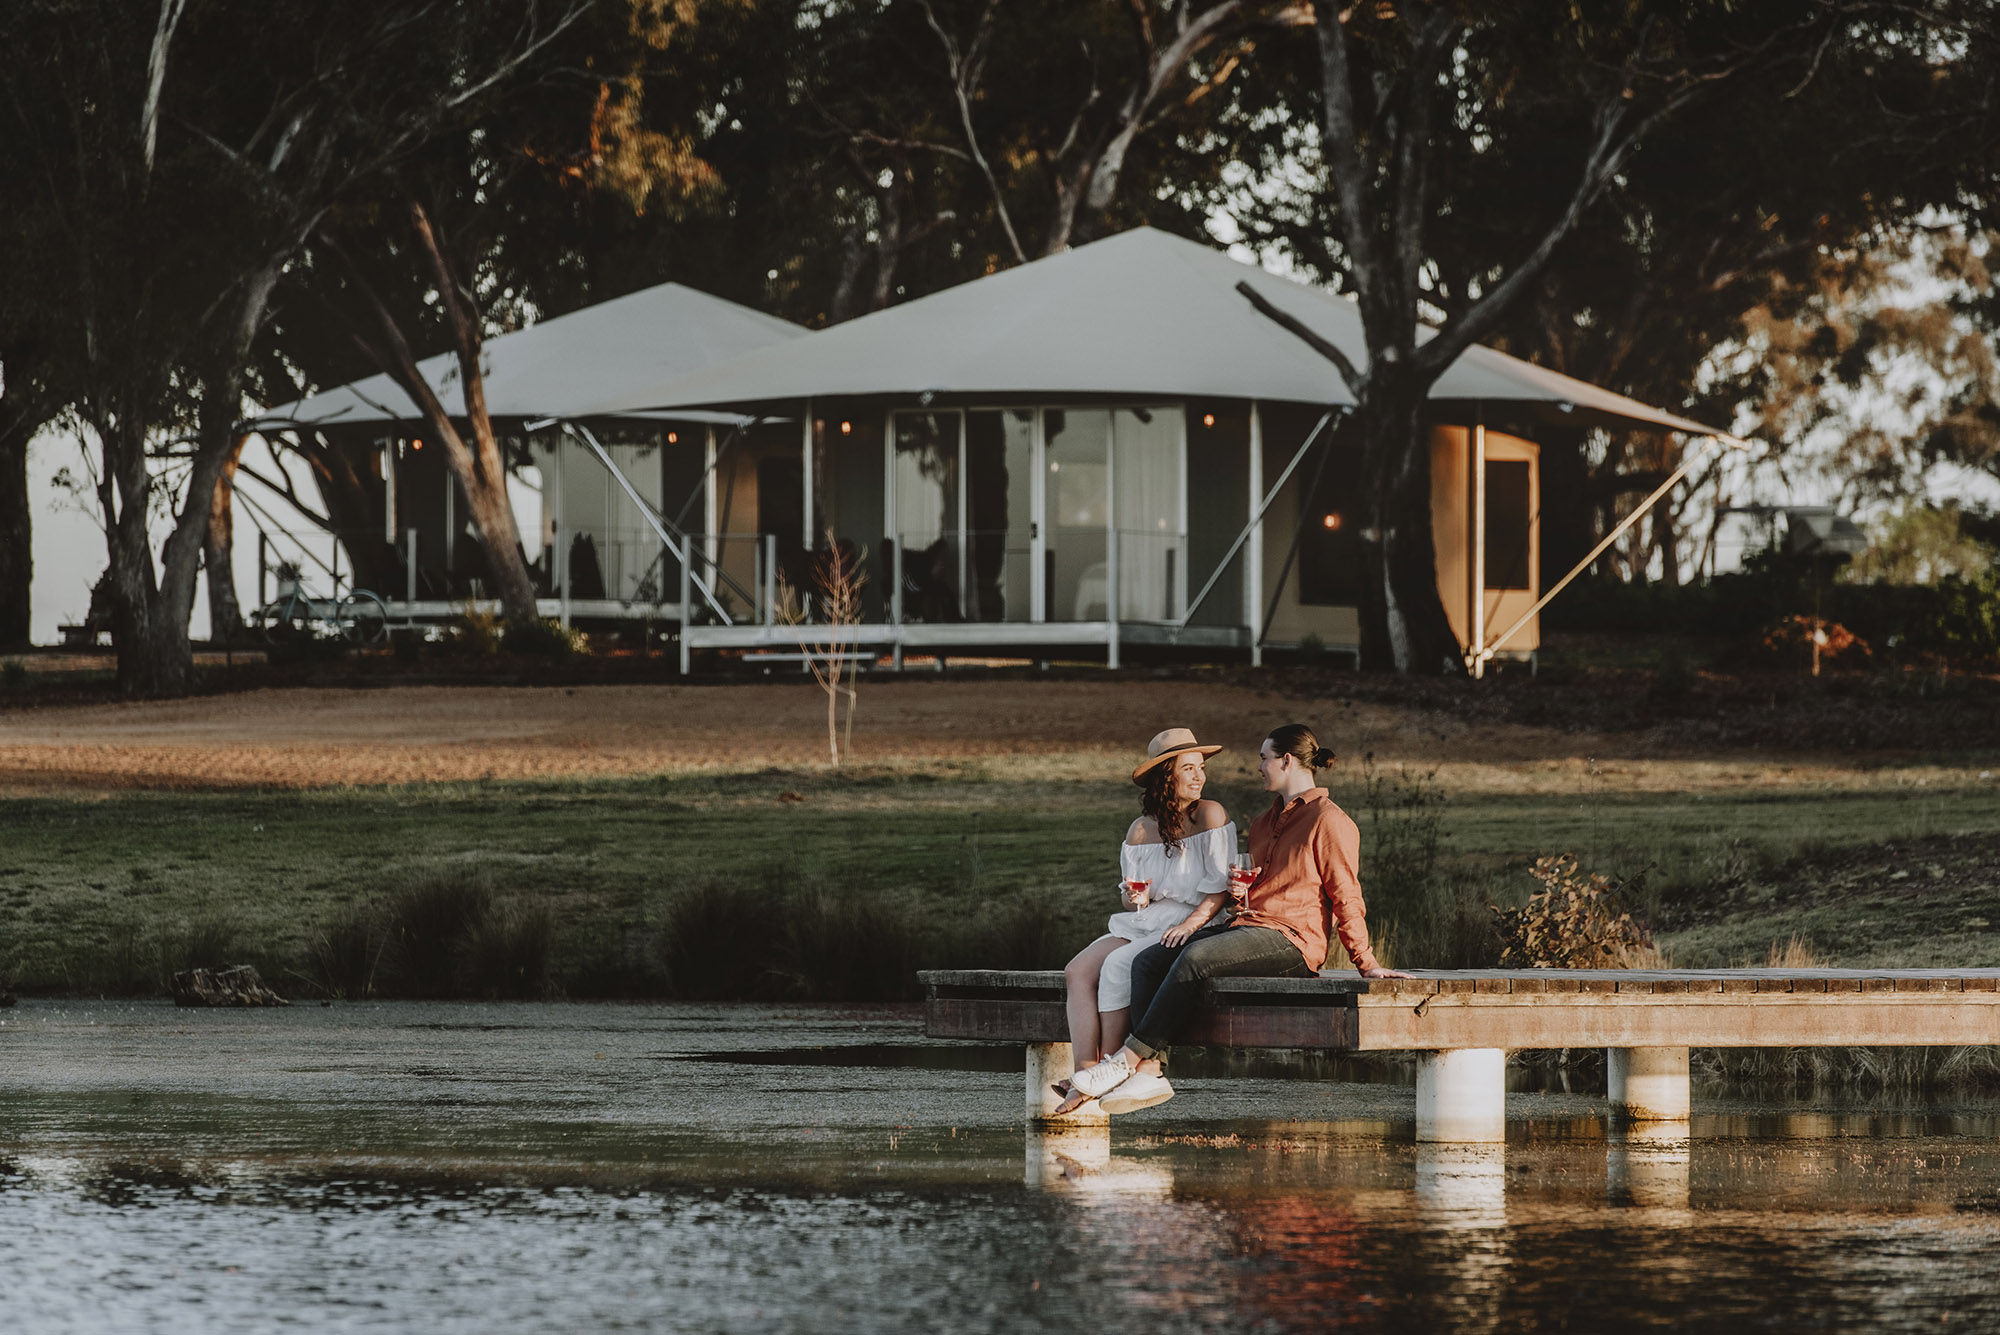 tents accommodation romantic getaway nature mudgee stay